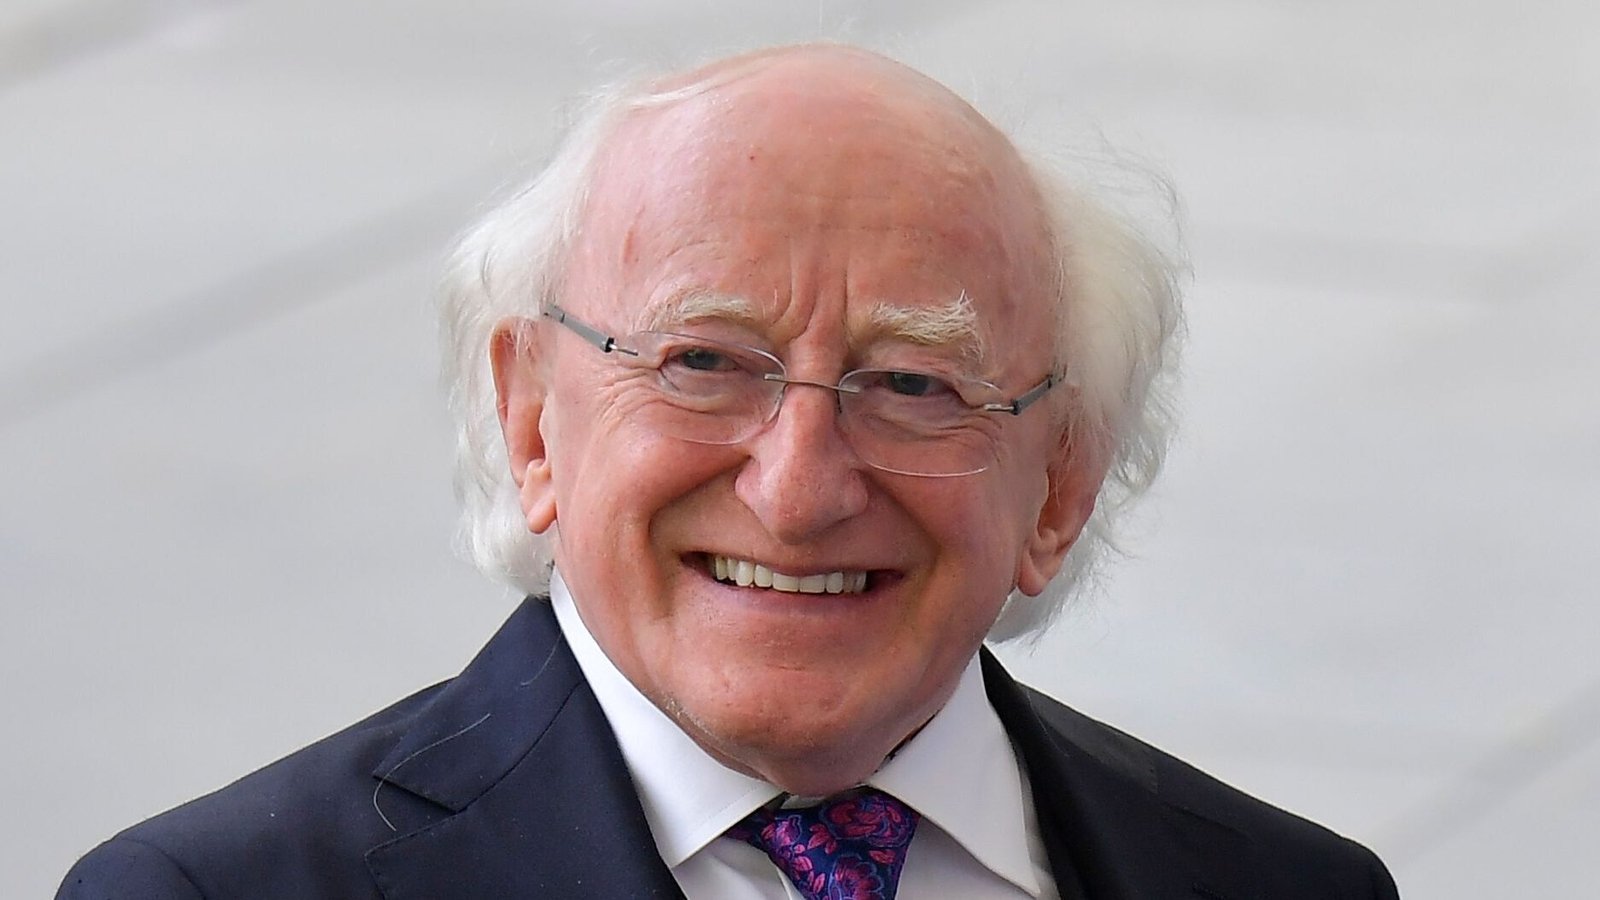 Learn about the Office of the President of Ireland